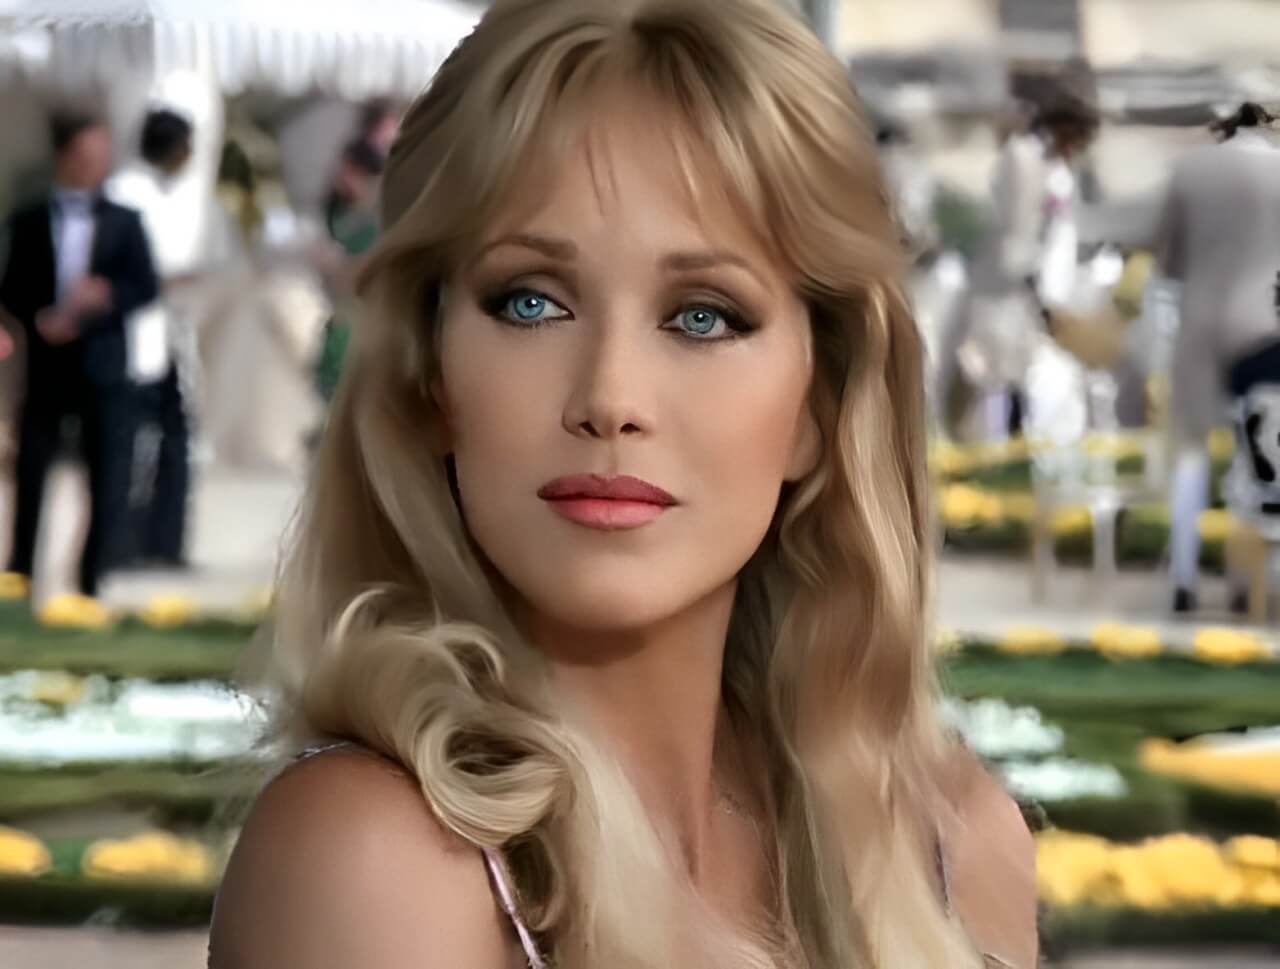 11 Unbelievable Facts About 'Bond Girl' Tanya Roberts